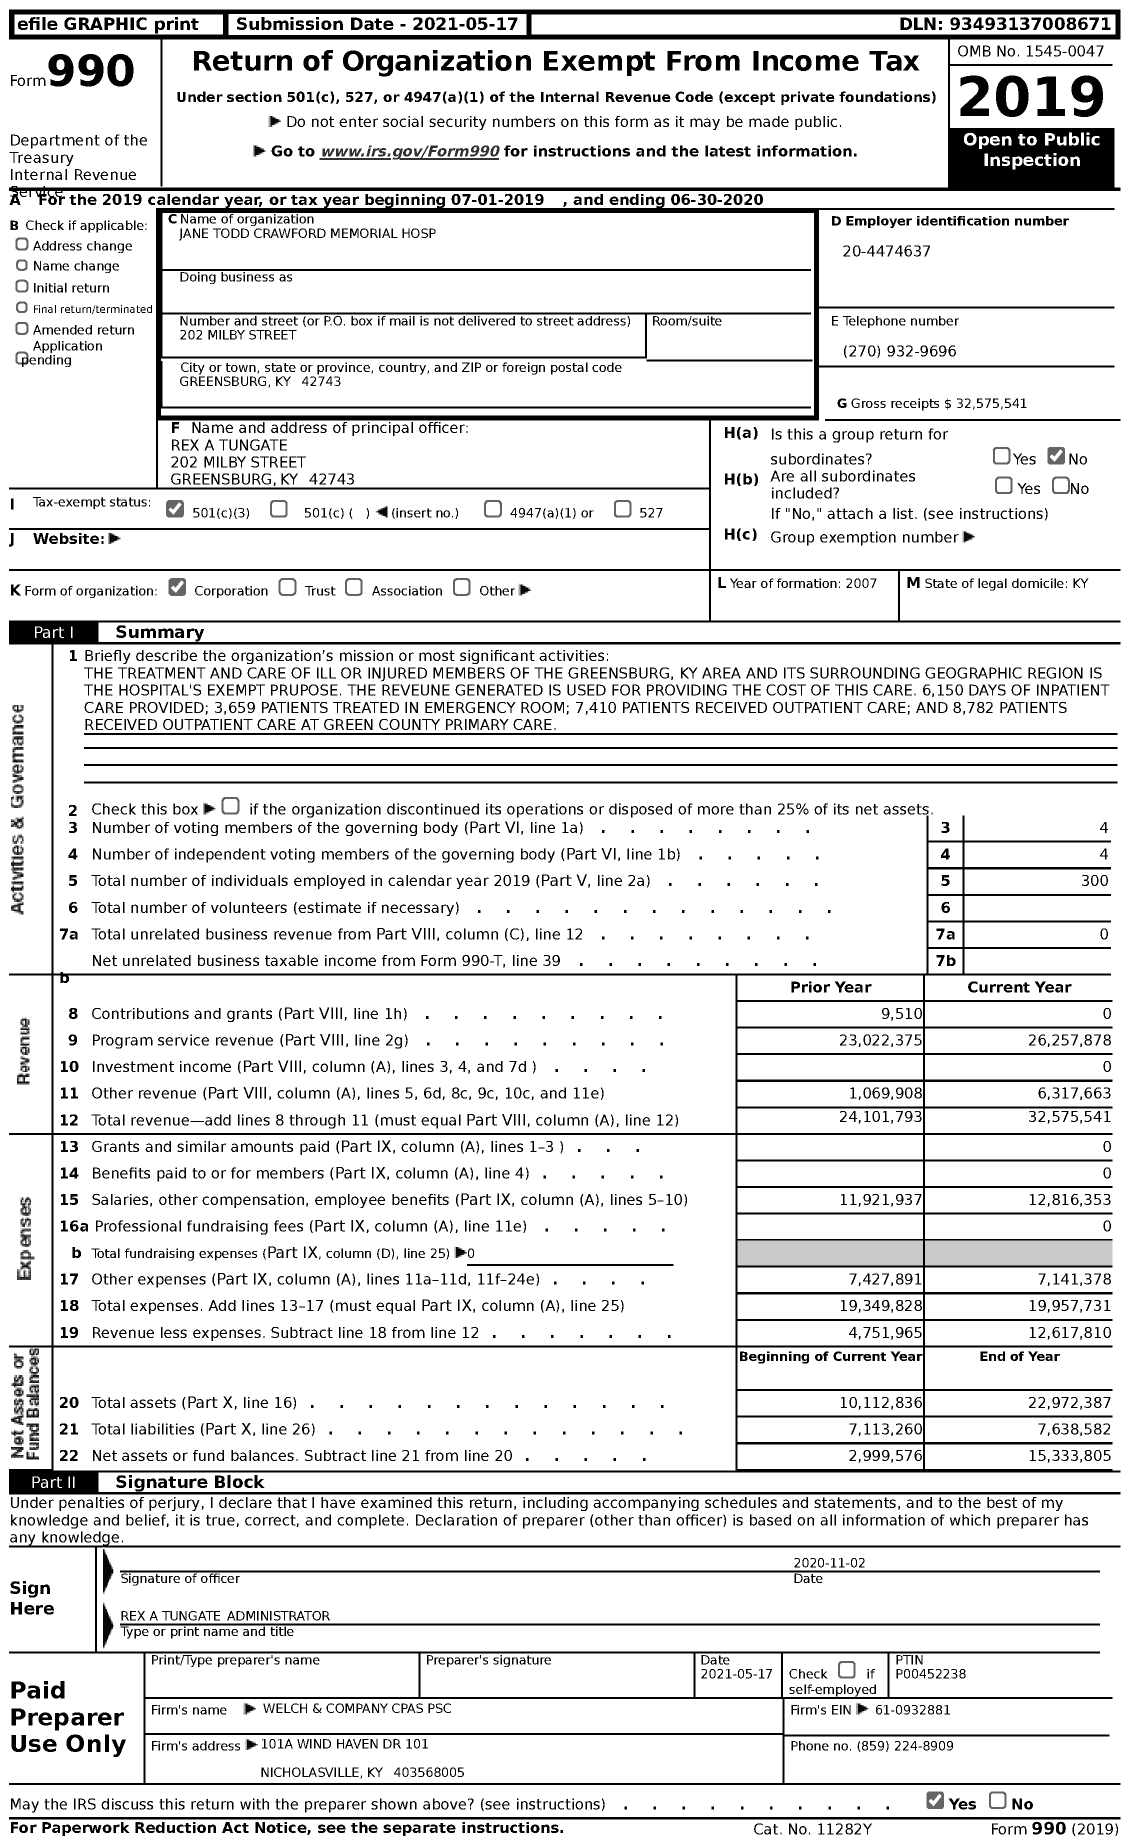 Image of first page of 2019 Form 990 for Jane Todd Crawford Memorial Hospital